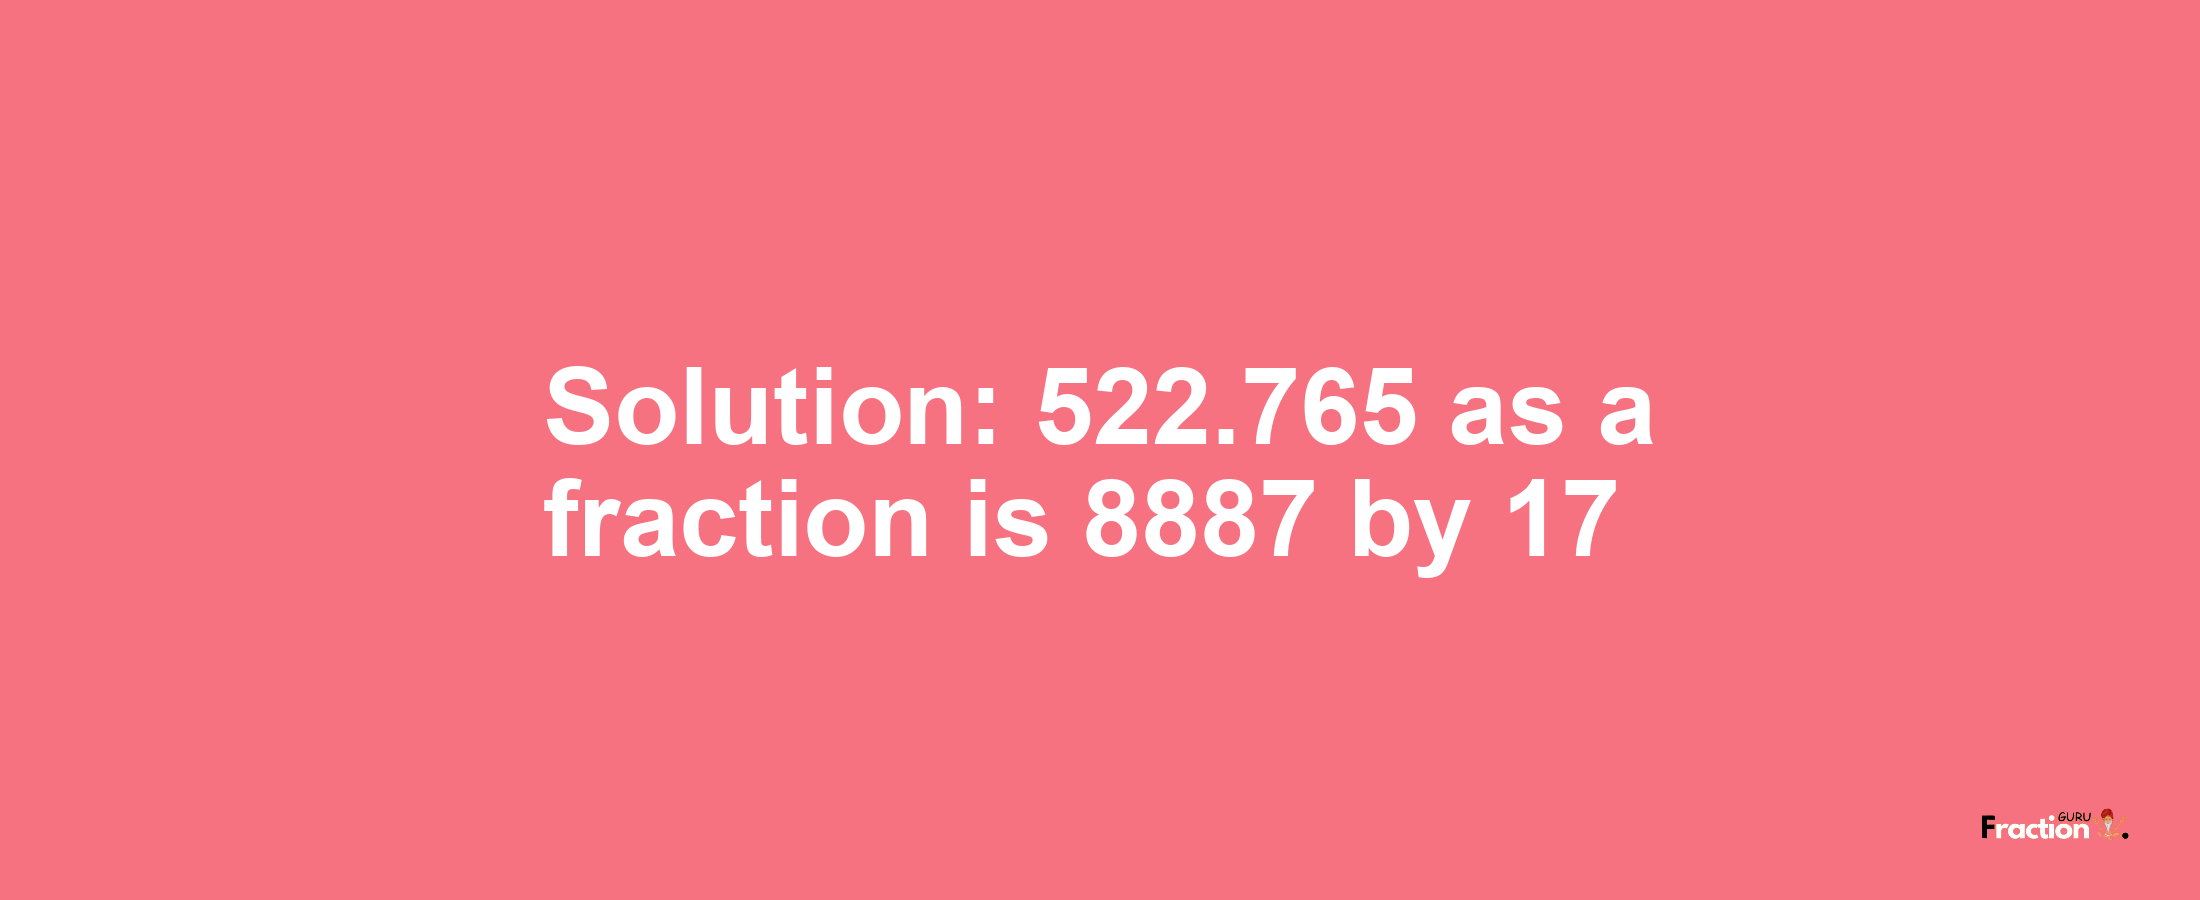 Solution:522.765 as a fraction is 8887/17